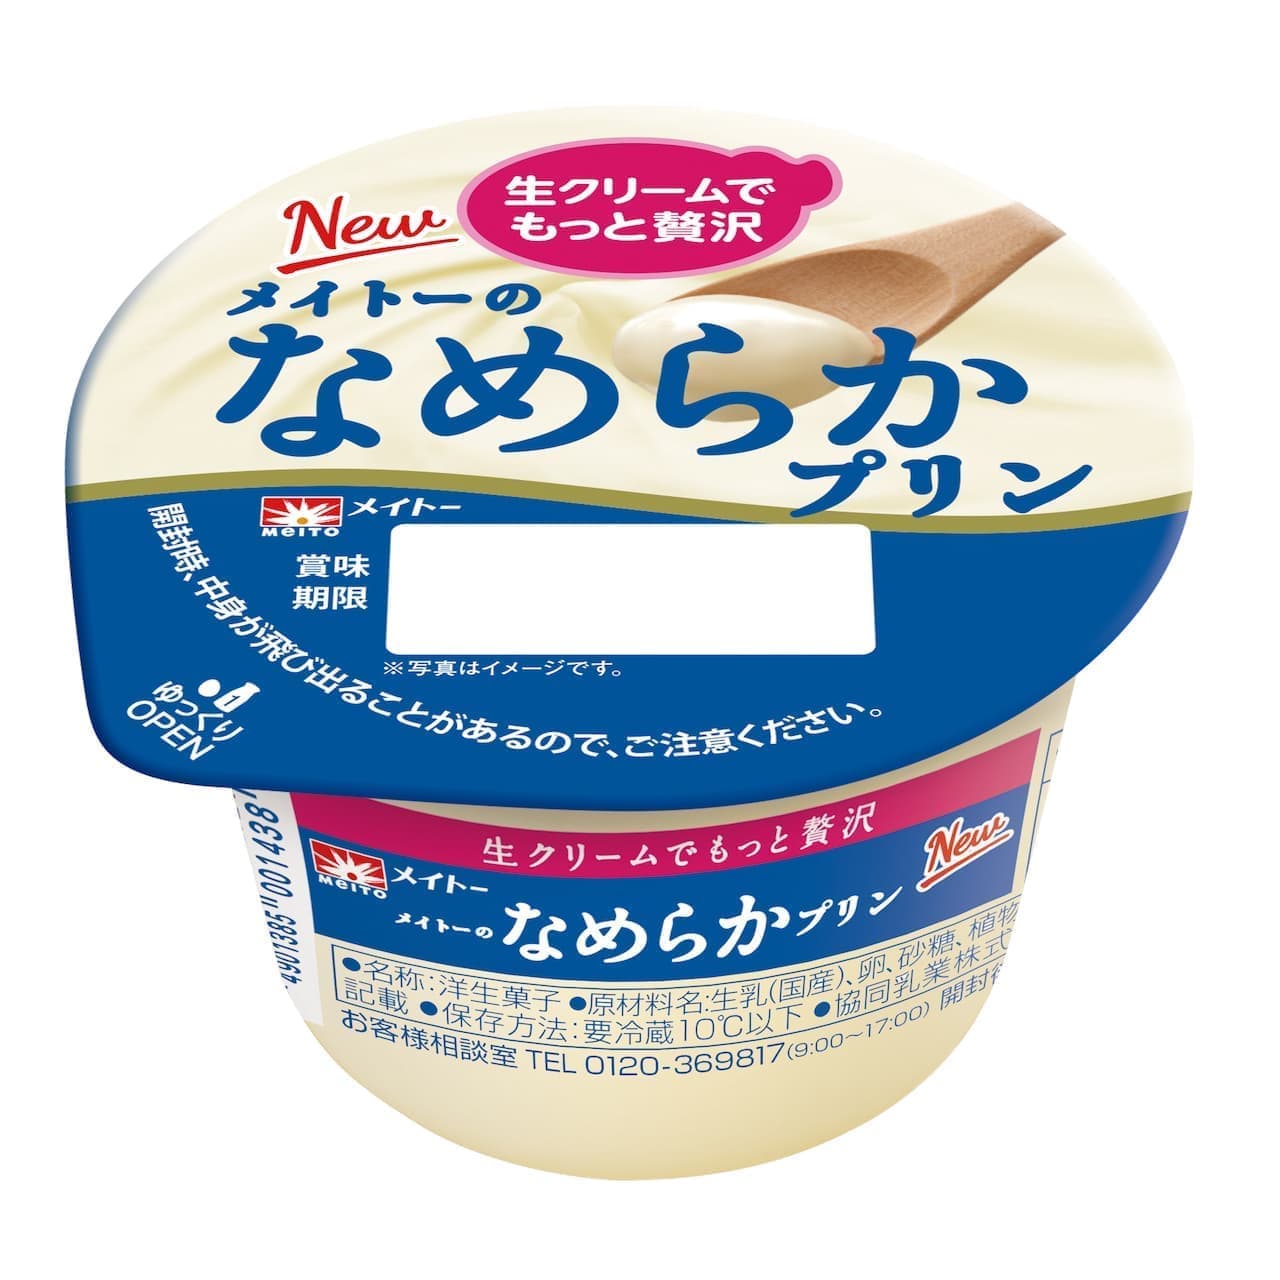 Mateo's Smooth Pudding" from Kyodo Dairy